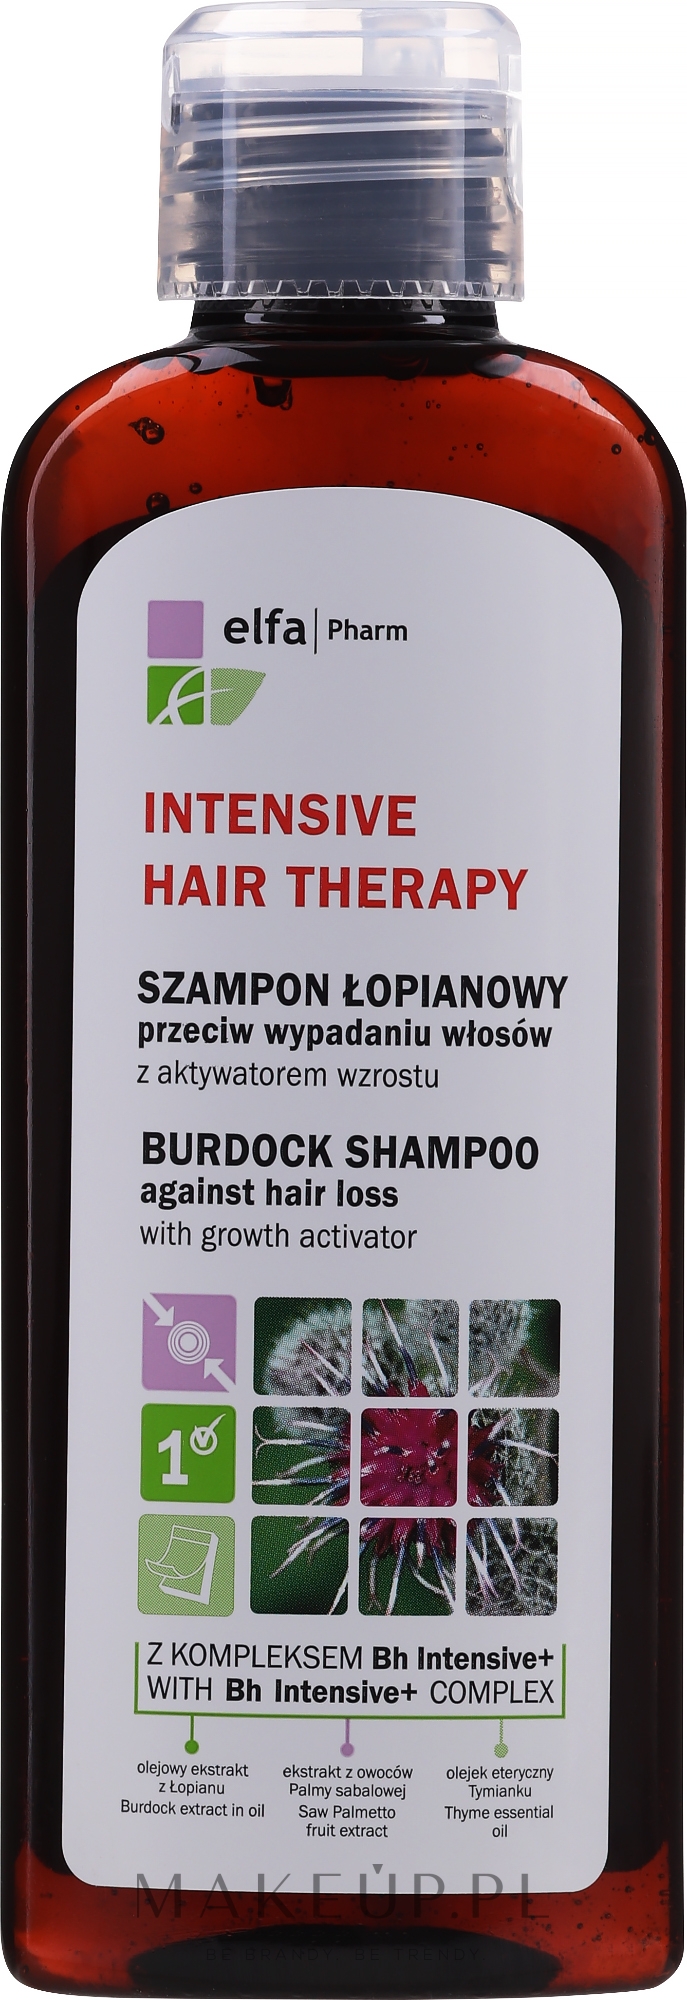 szampon lopianowy intensive hair therapy